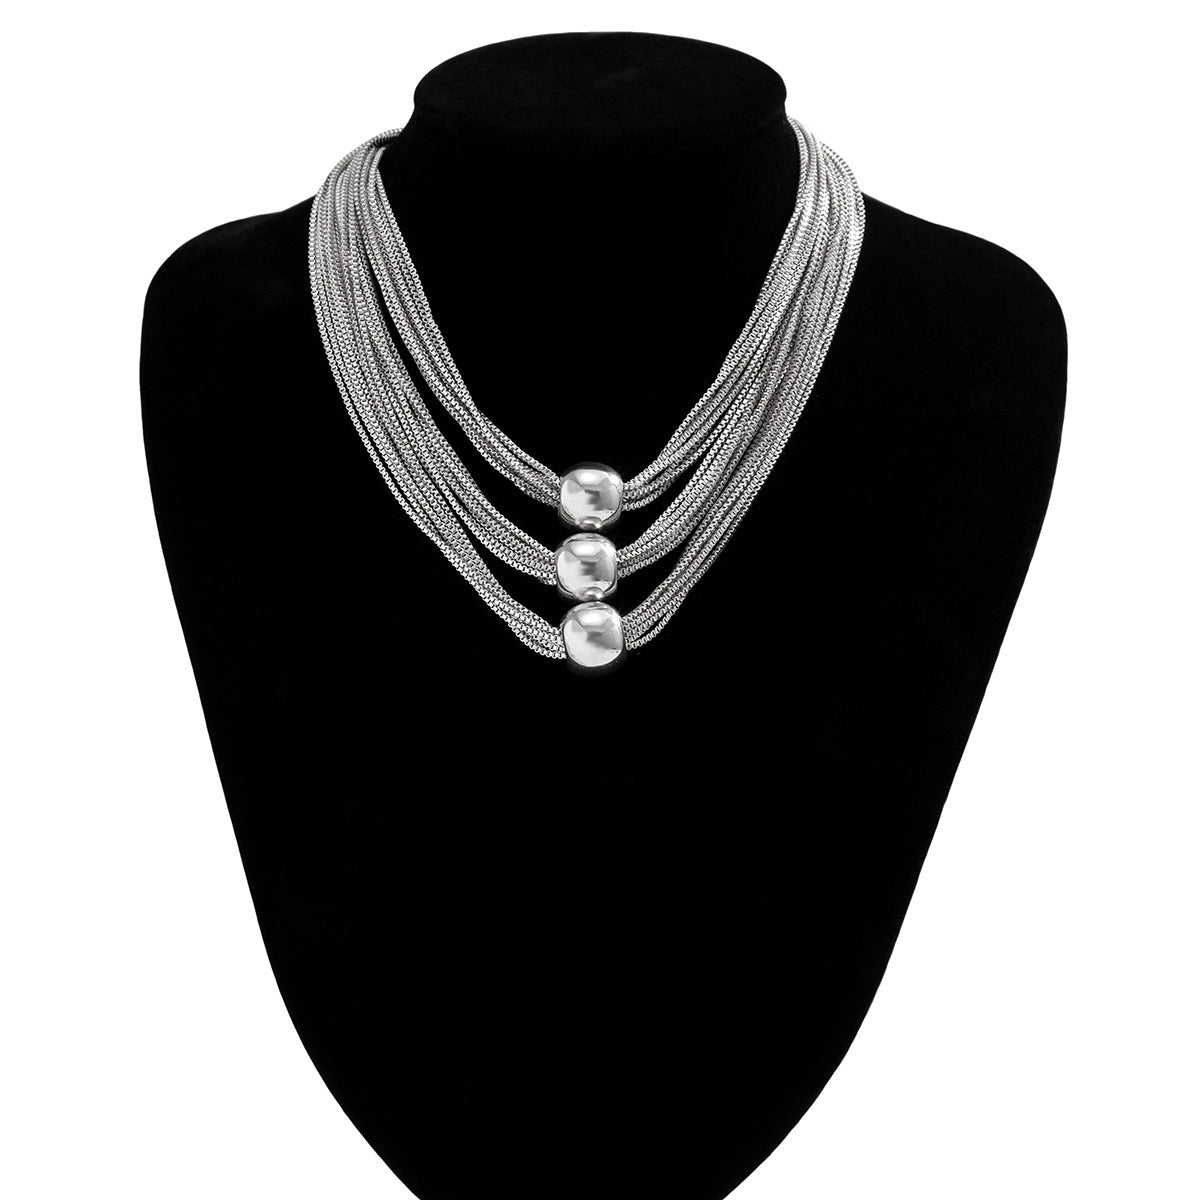 Extravagant Multilayer Retro Necklace with Metal Ball Pendant for Women